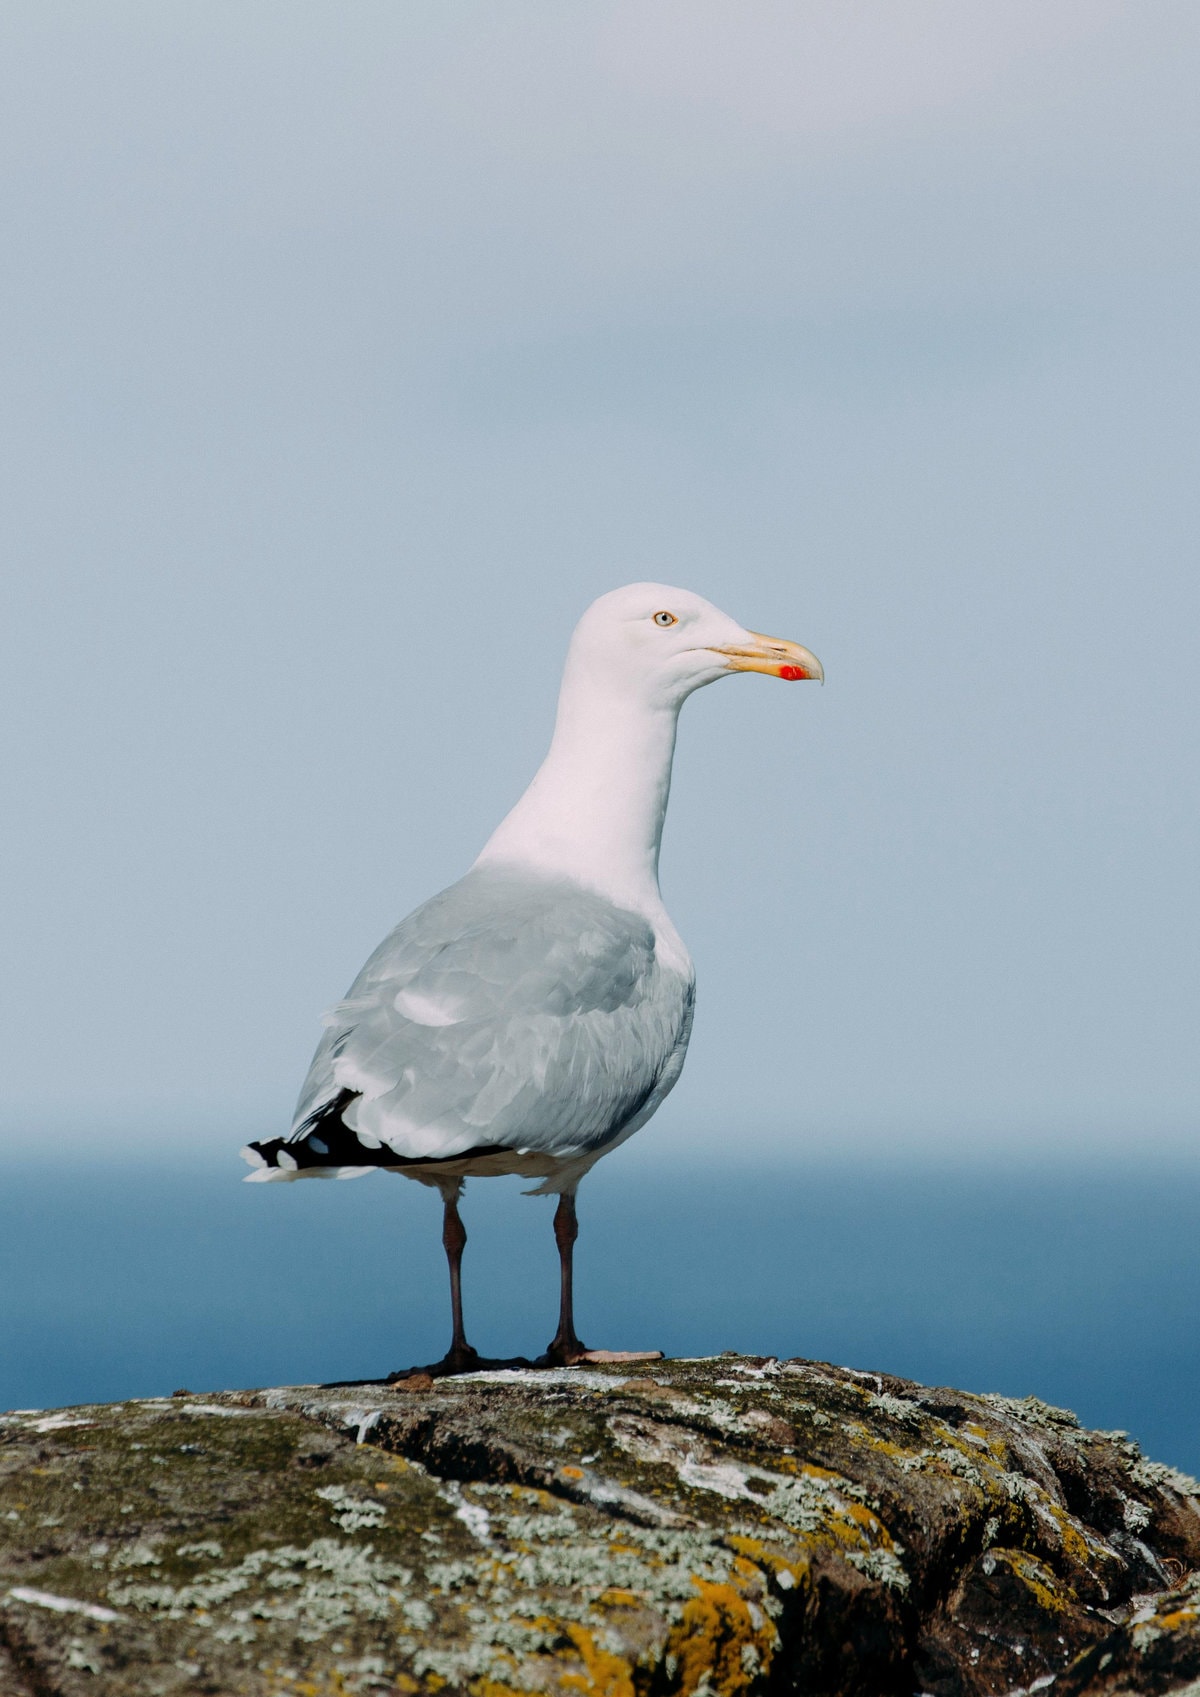 A seagull on the Isle of May in Fife, Scotland